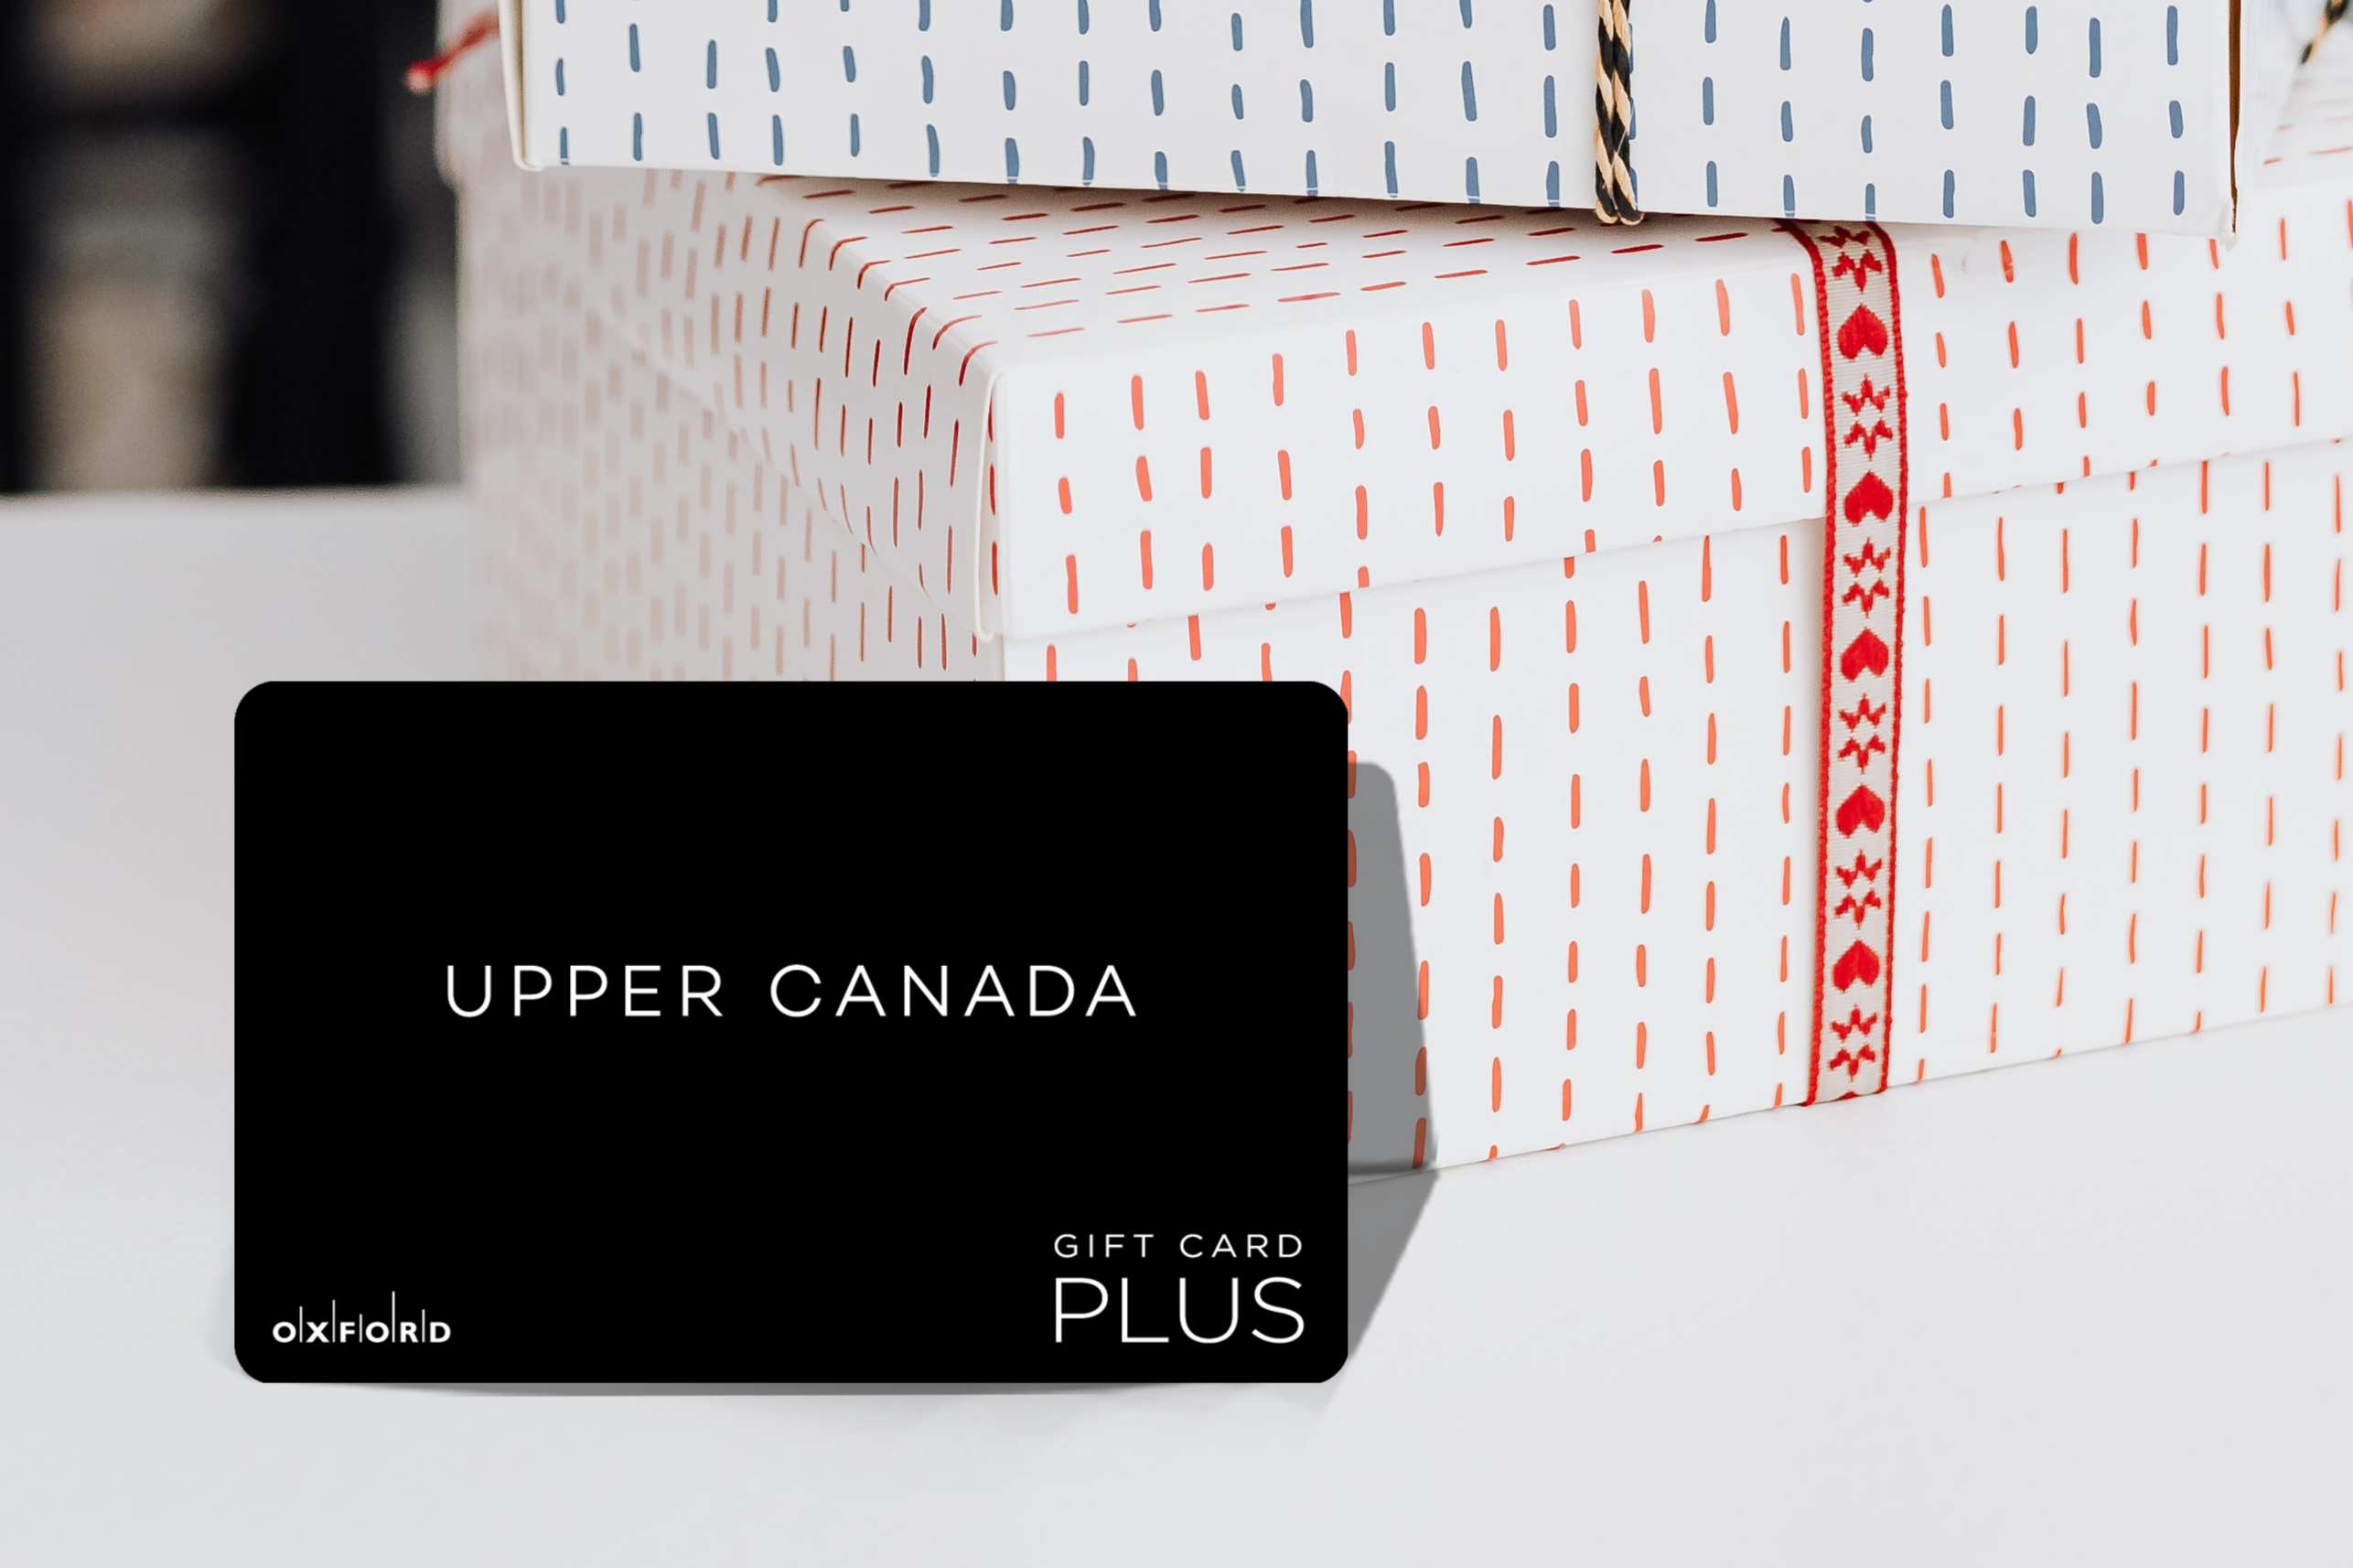 promotional image of a black UCM gift card in front of two gift boxes